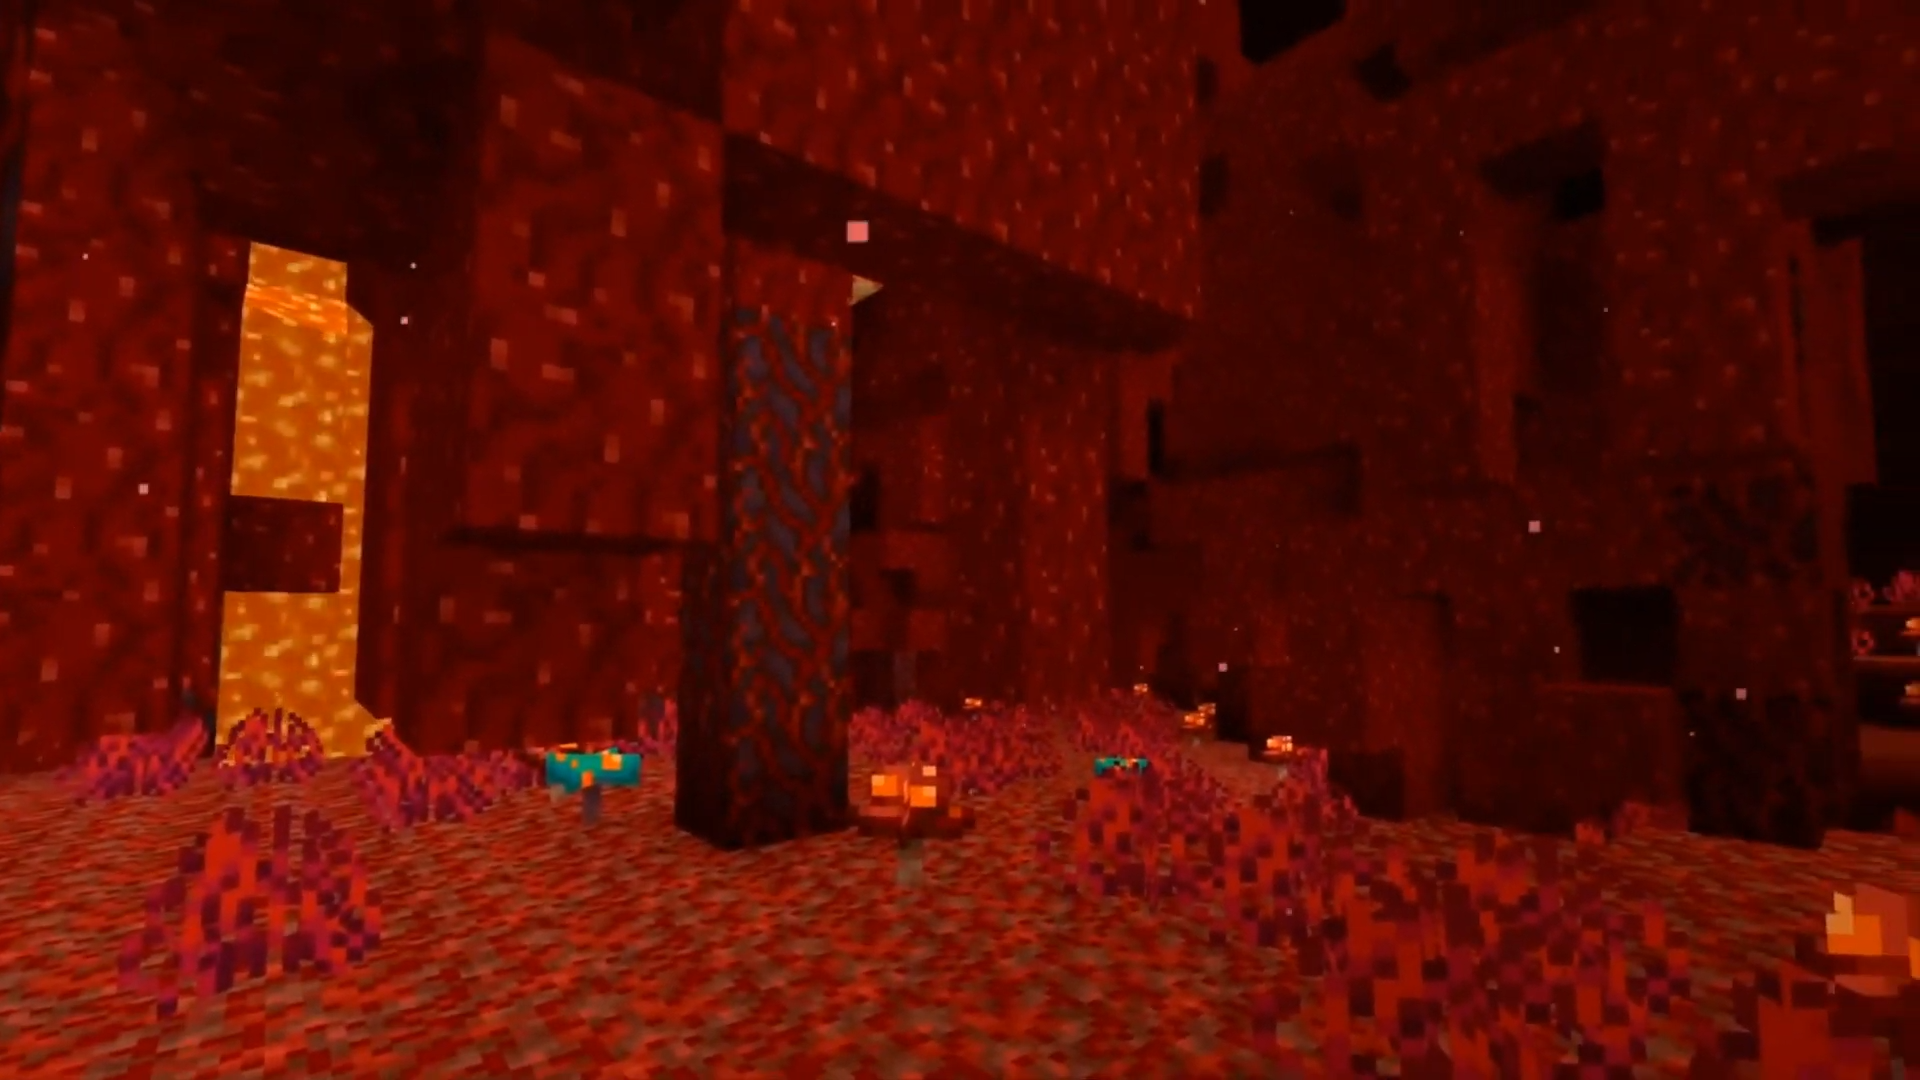 Minecraft 1.16 Update Brings Materials To The Nether With